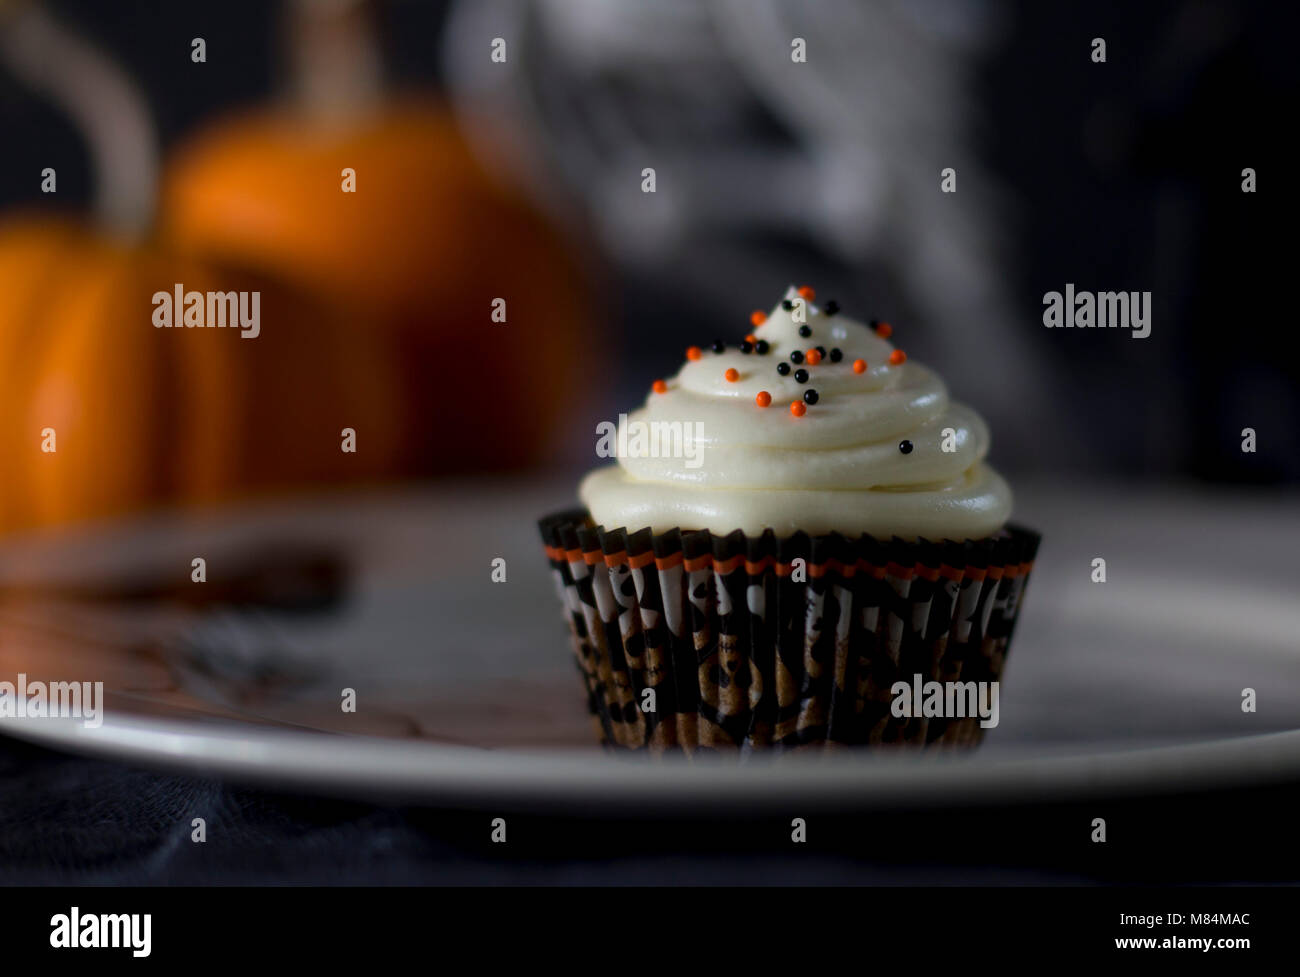 Delicious Pumpkin Halloween Themed Cupcake on a White Plate Stock Photo